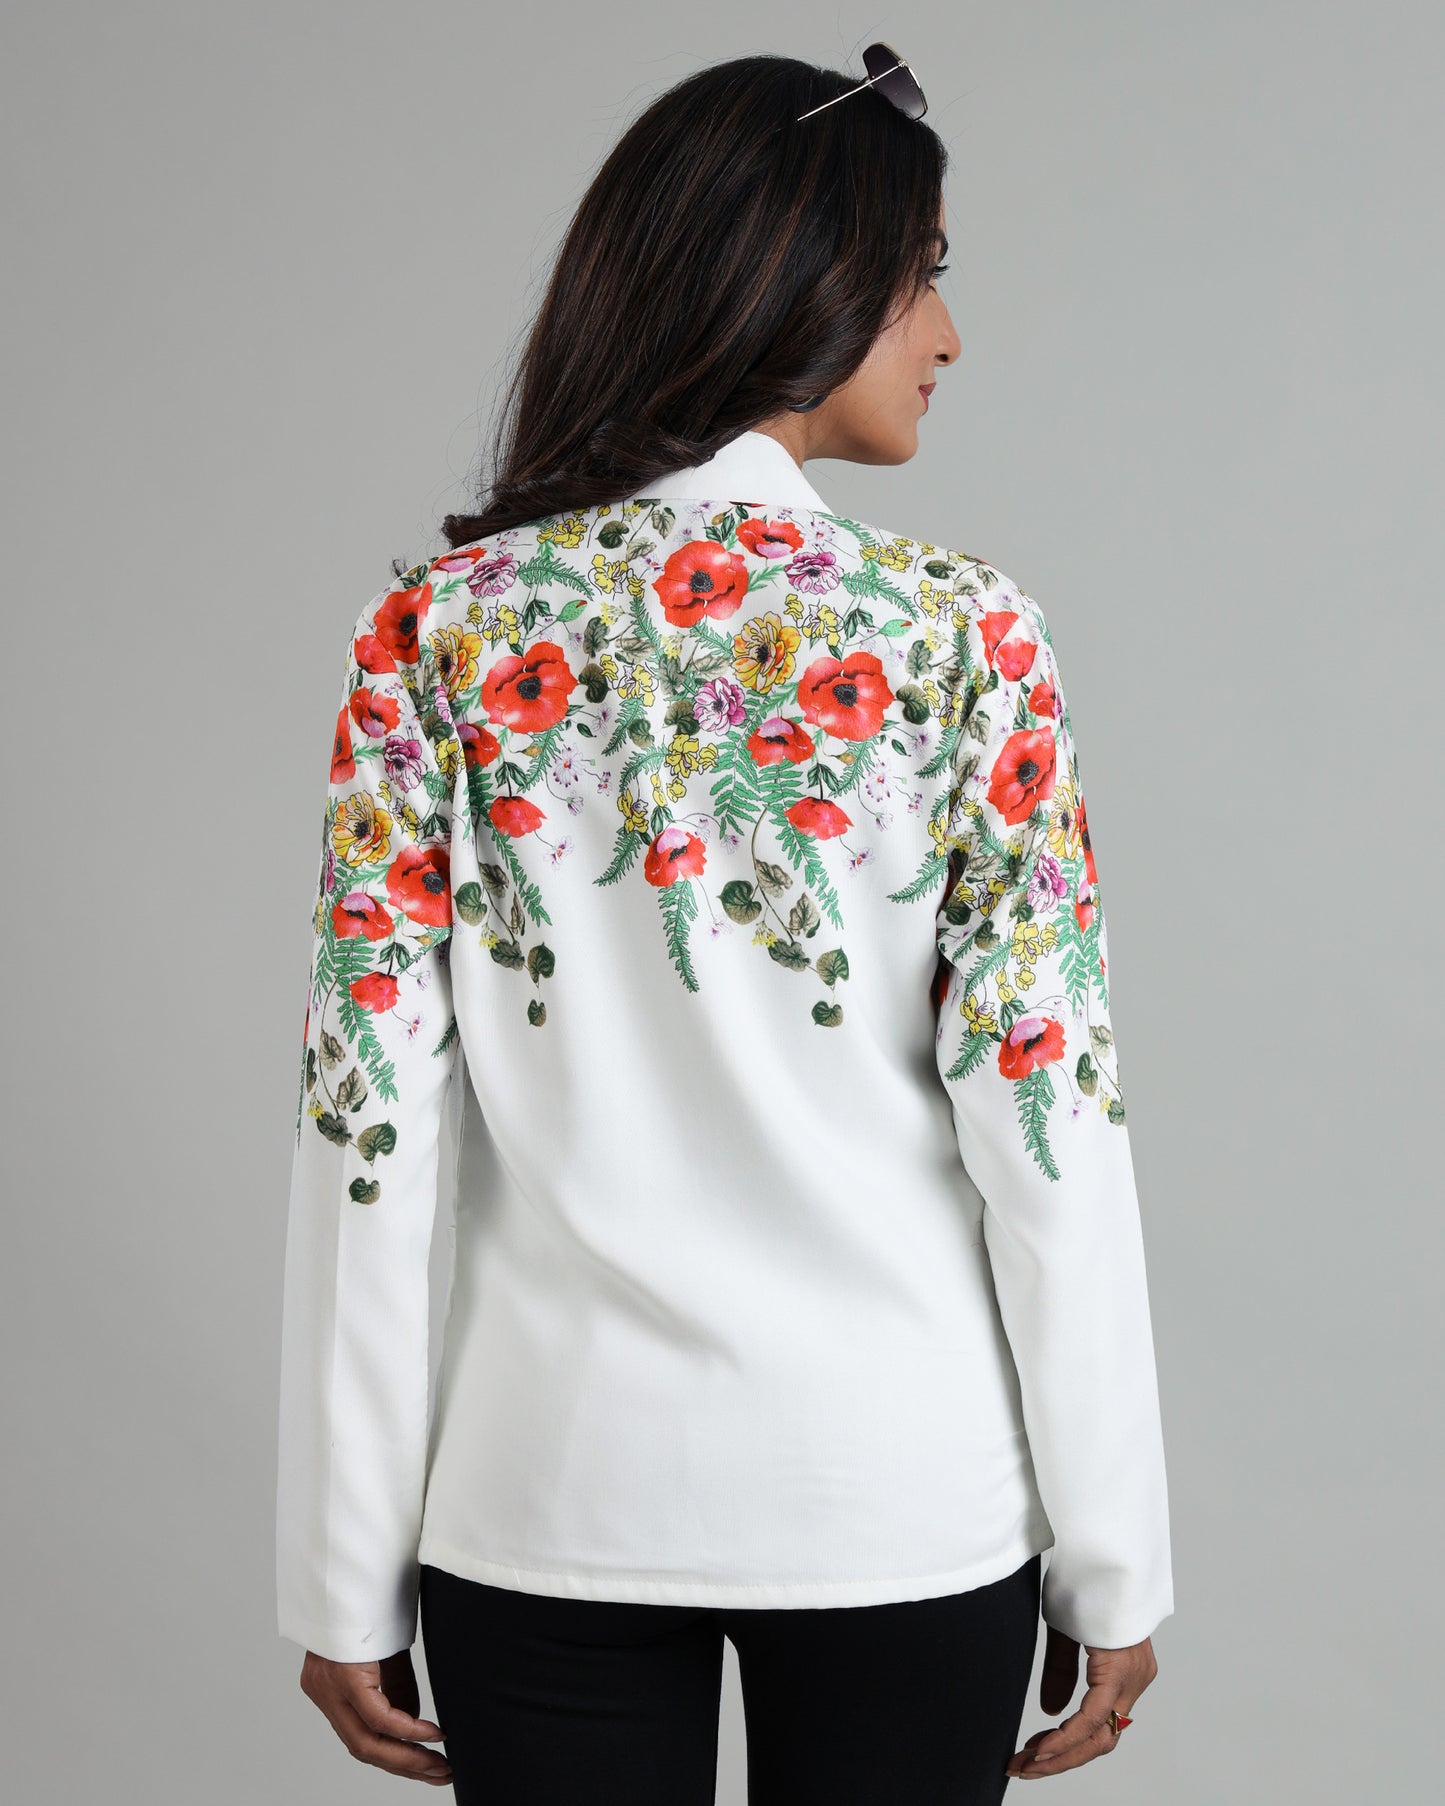 The Floral: Experience A Jacket Unlike Any Other